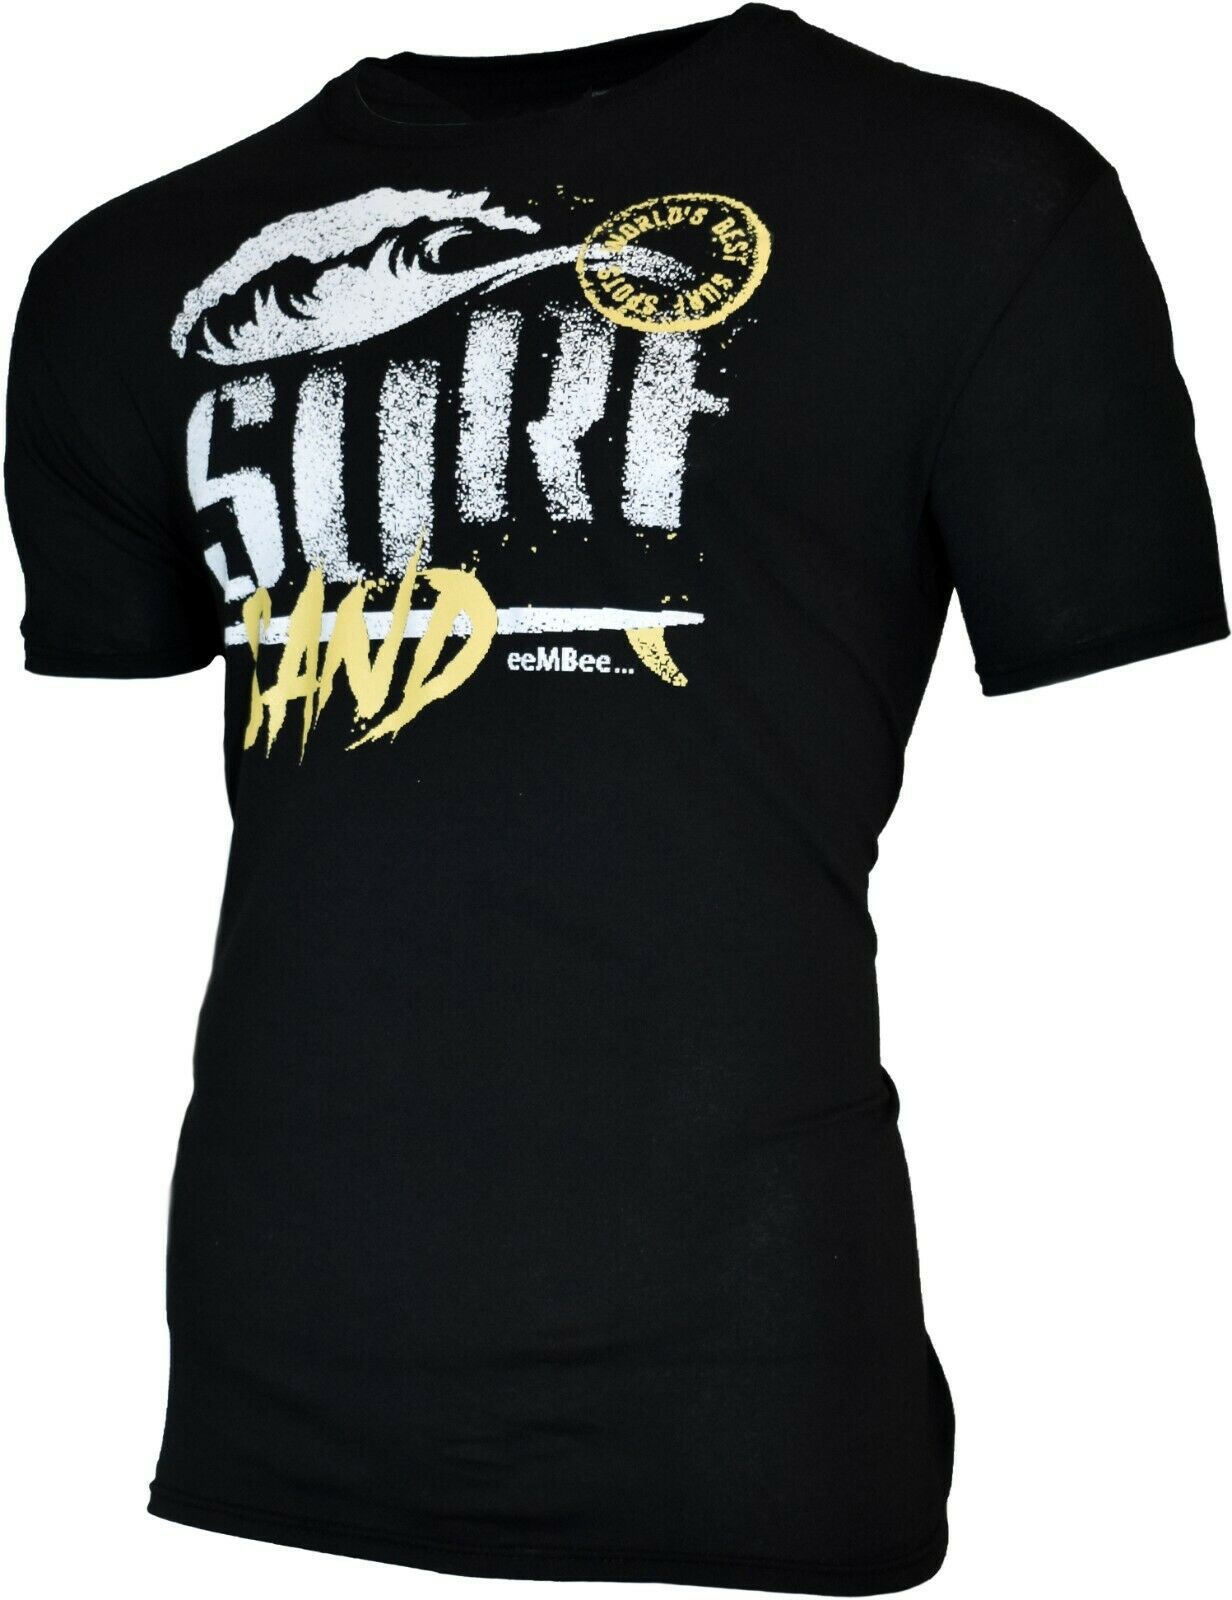 Men's T-Shirt Worlds Best Surf Sand Stops by eMBee